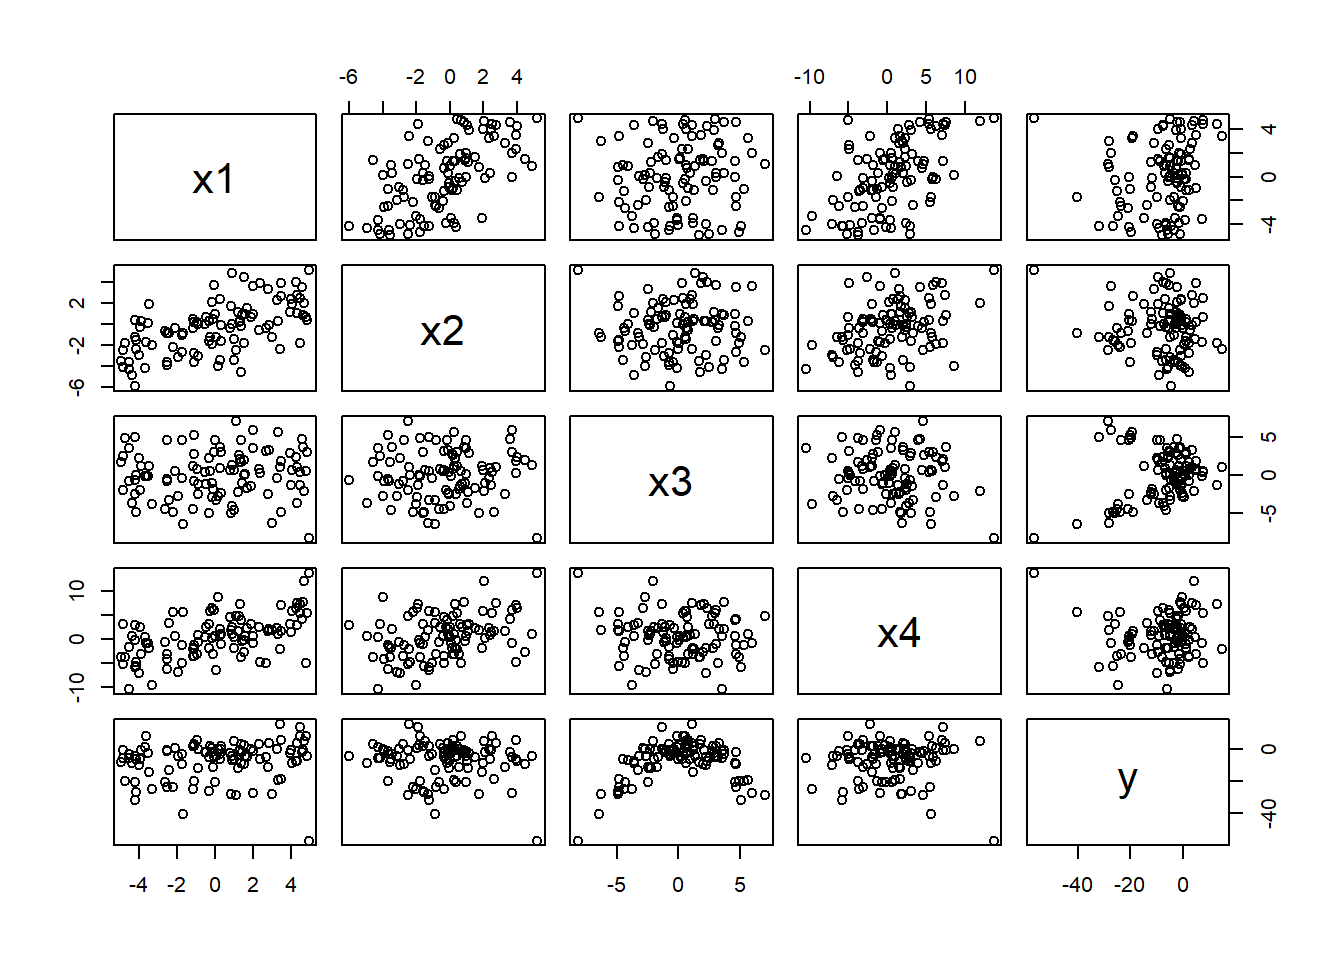 Pairwise scatterplot of the predictors in the partialr data set in the Data4ecologists package (Fieberg, 2021). These data were simulated so that y has a positive association with x1, a negative association with x2 (which is also negatively correlated with x1), a quadratic relationship with x3, and a spurious relationship with x4 (due to its correlation with x1).